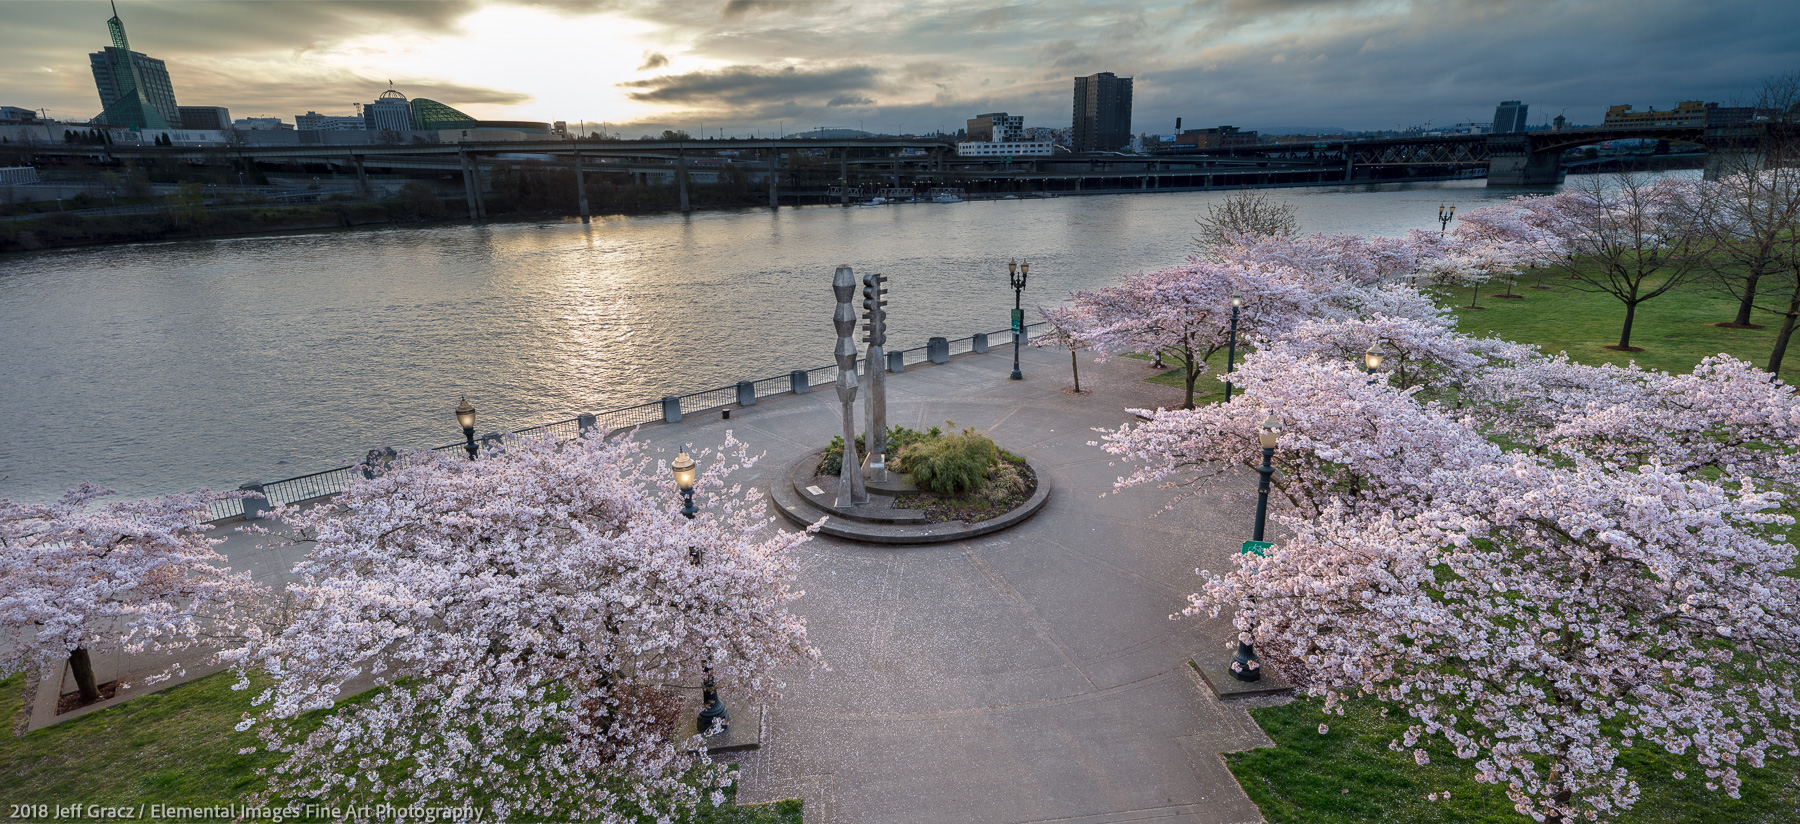 Portland Cherry Blossoms at Sunrise | Portland | OR | USA - © 2018 Jeff Gracz / Elemental Images Fine Art Photography - All Rights Reserved Worldwide